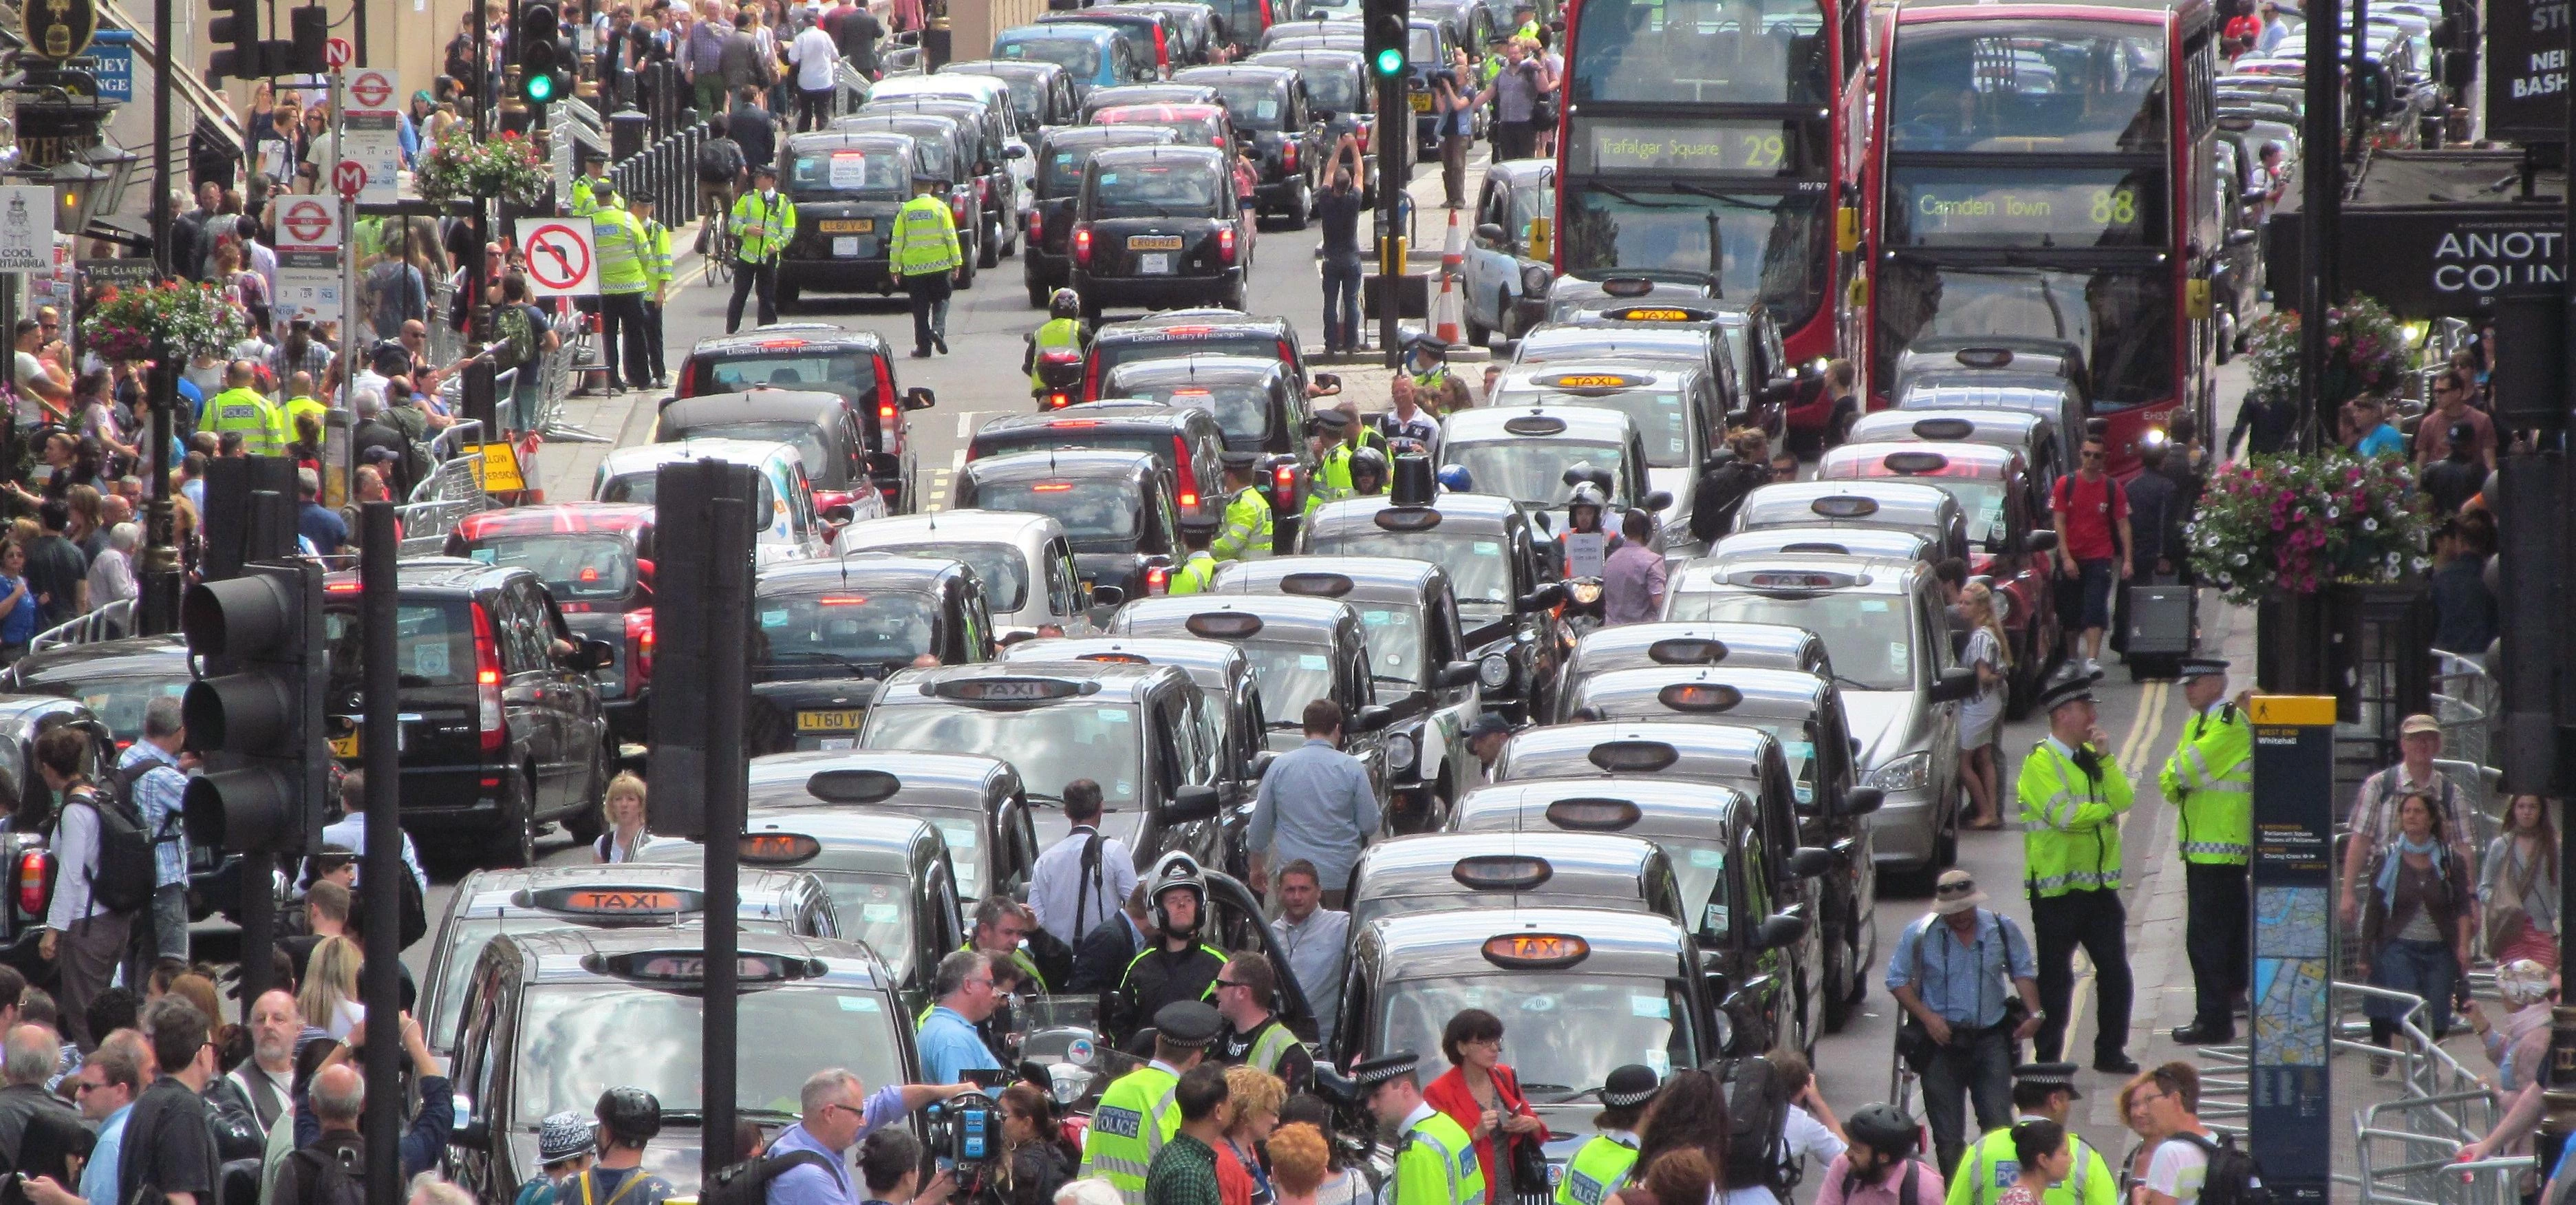 London anti-Uber taxi protest June 11 2014 036